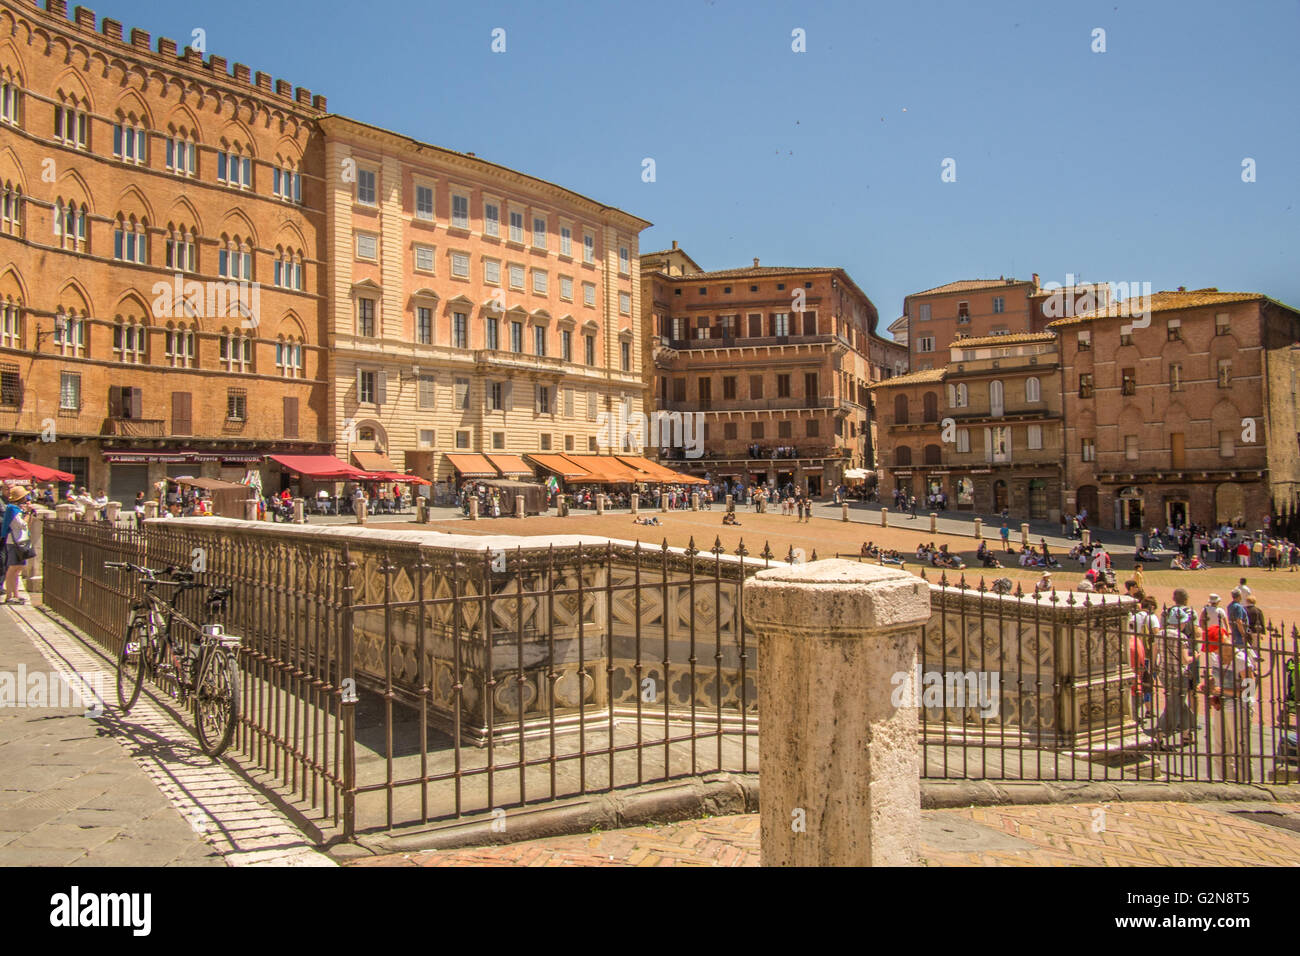 'Il Campo', a medieval Piazza in Siena, Tuscany, Italy Stock Photo